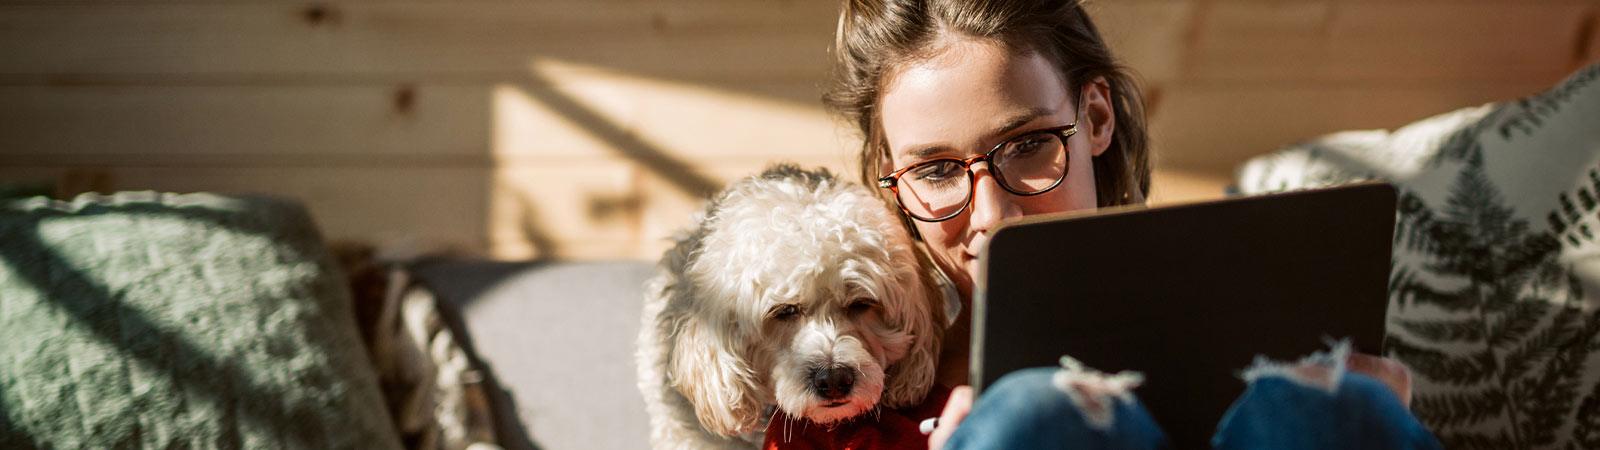 Image of a woman with her dog looking at a tablet